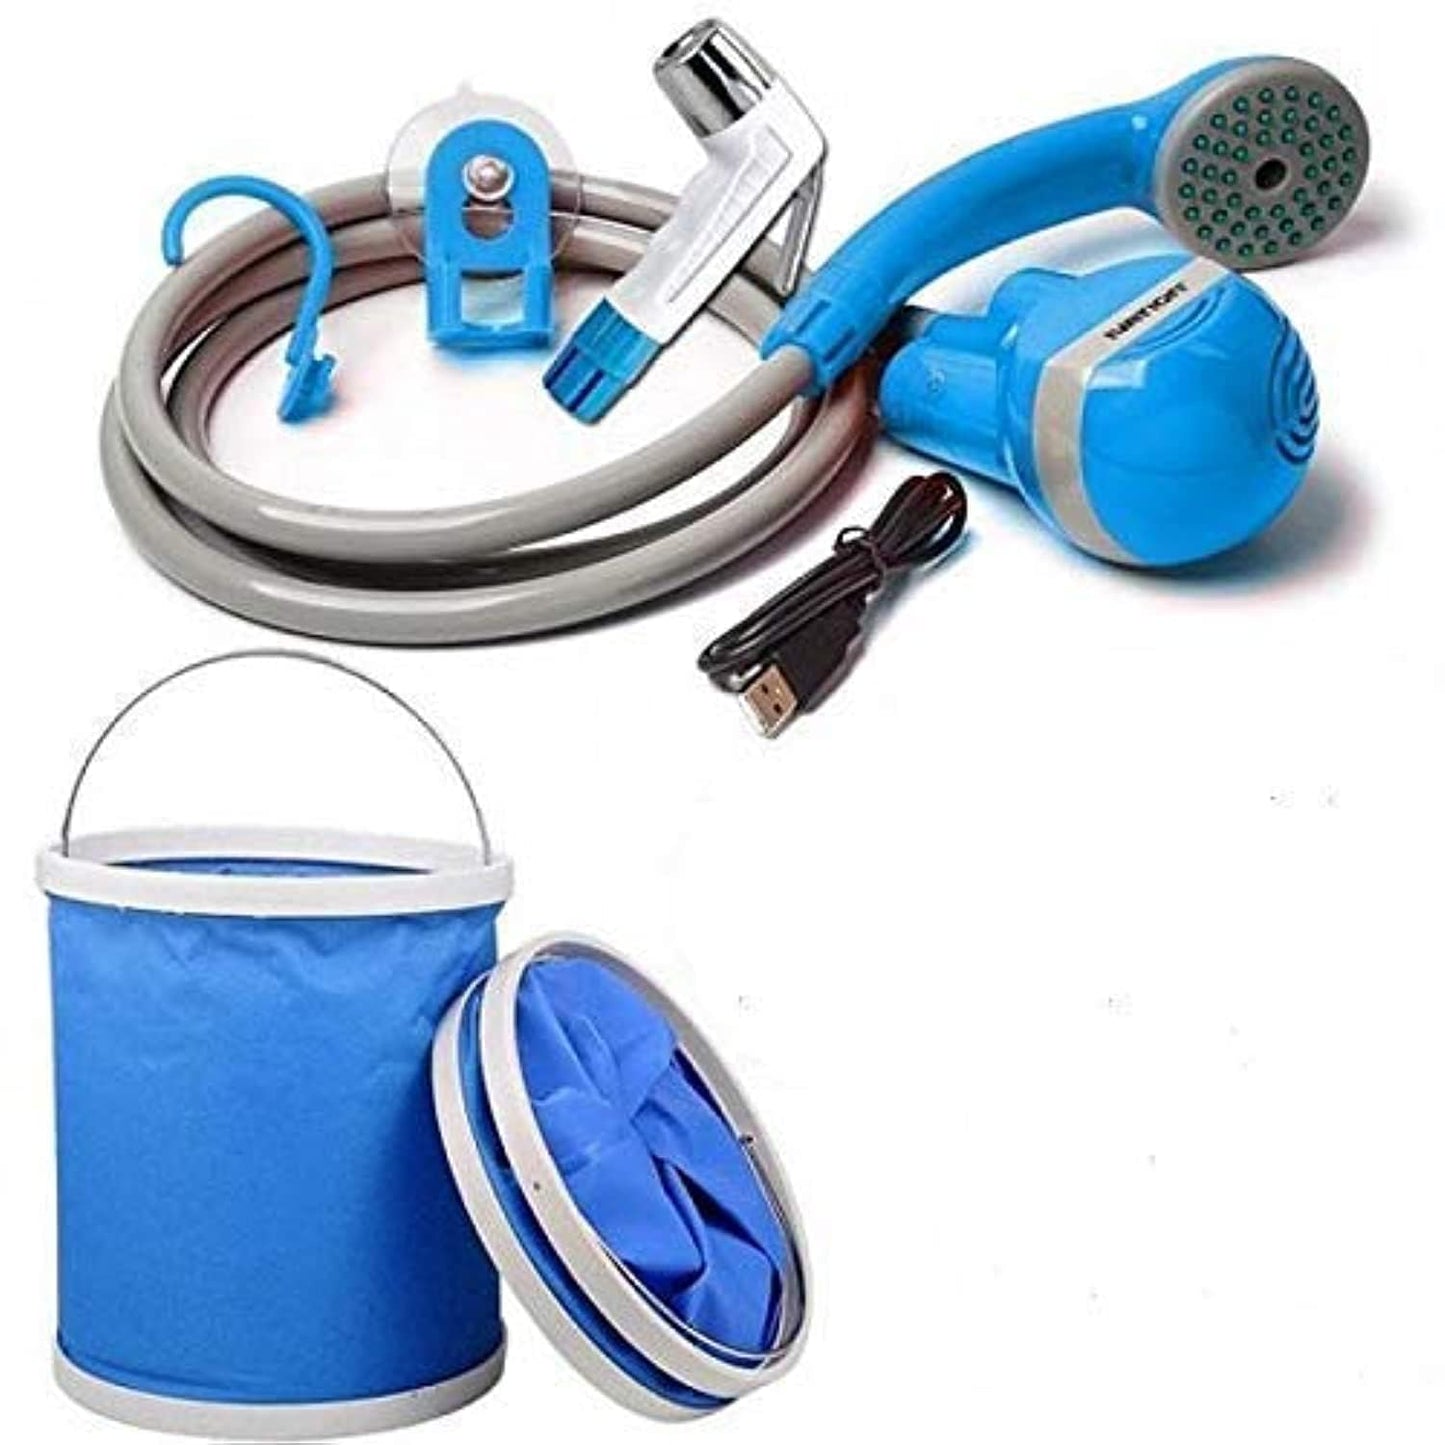 Portable Travel Camping Muslim Shattaf for Indoors and Outdoors Portable USB Camping Shattaf